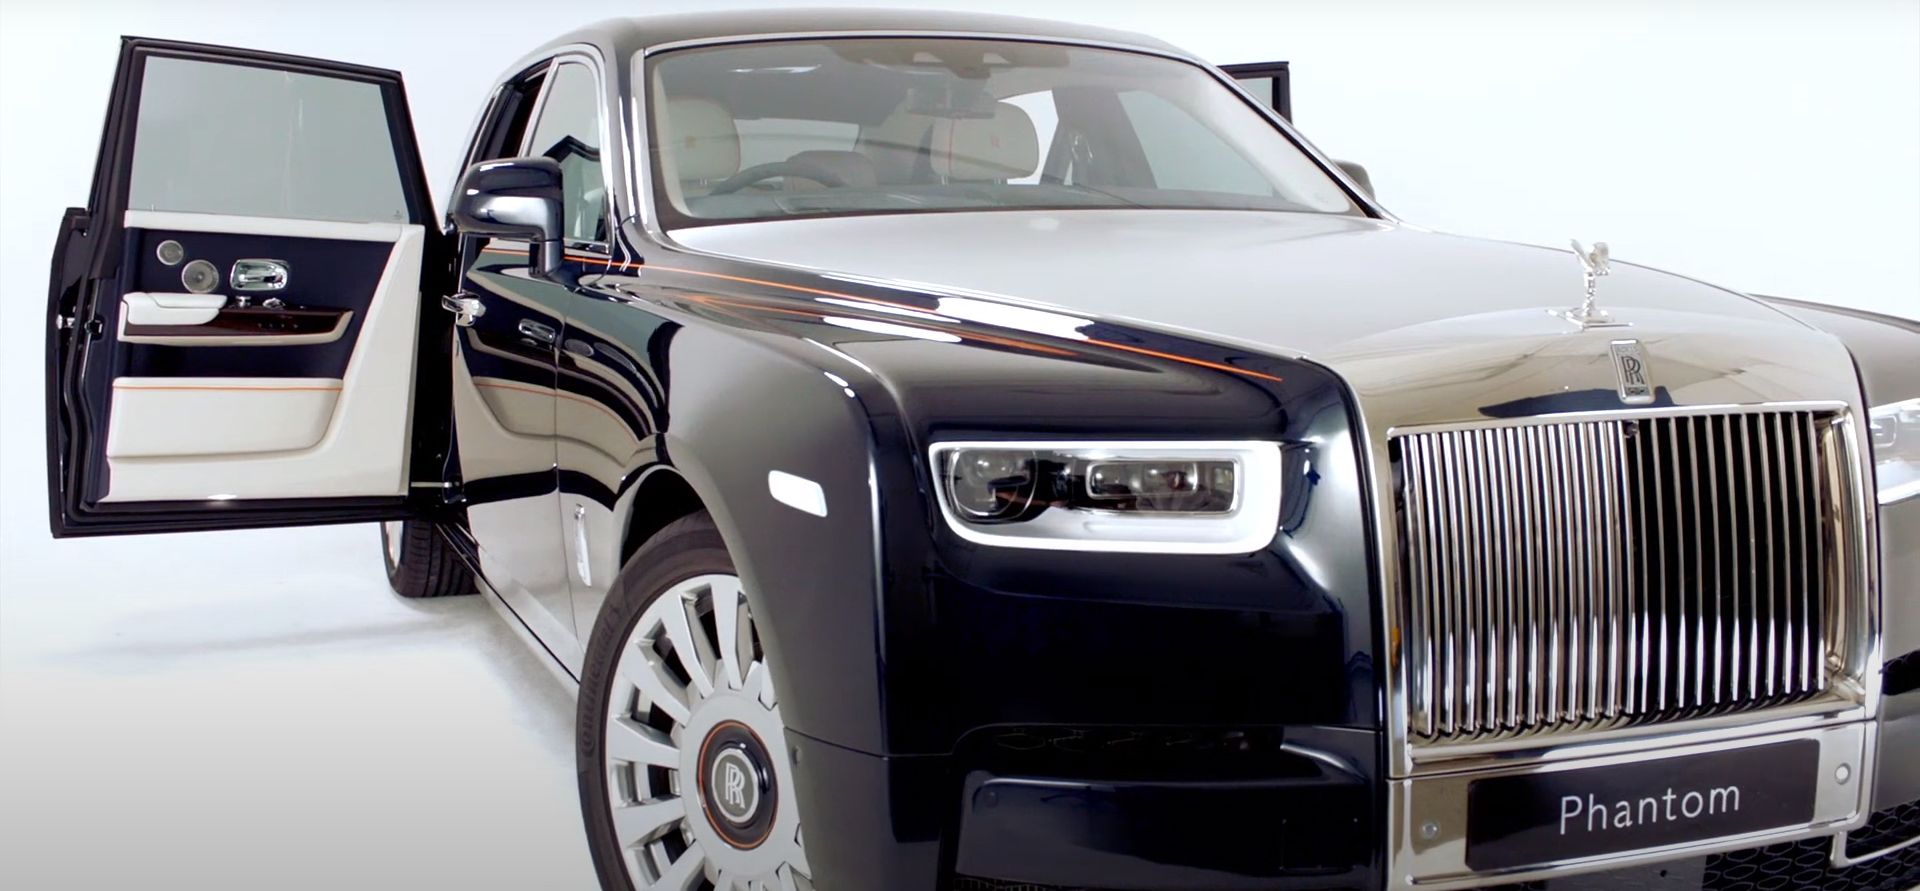 The All New Phantom Has Landed At Rolls-Royce Motor Cars Auckland